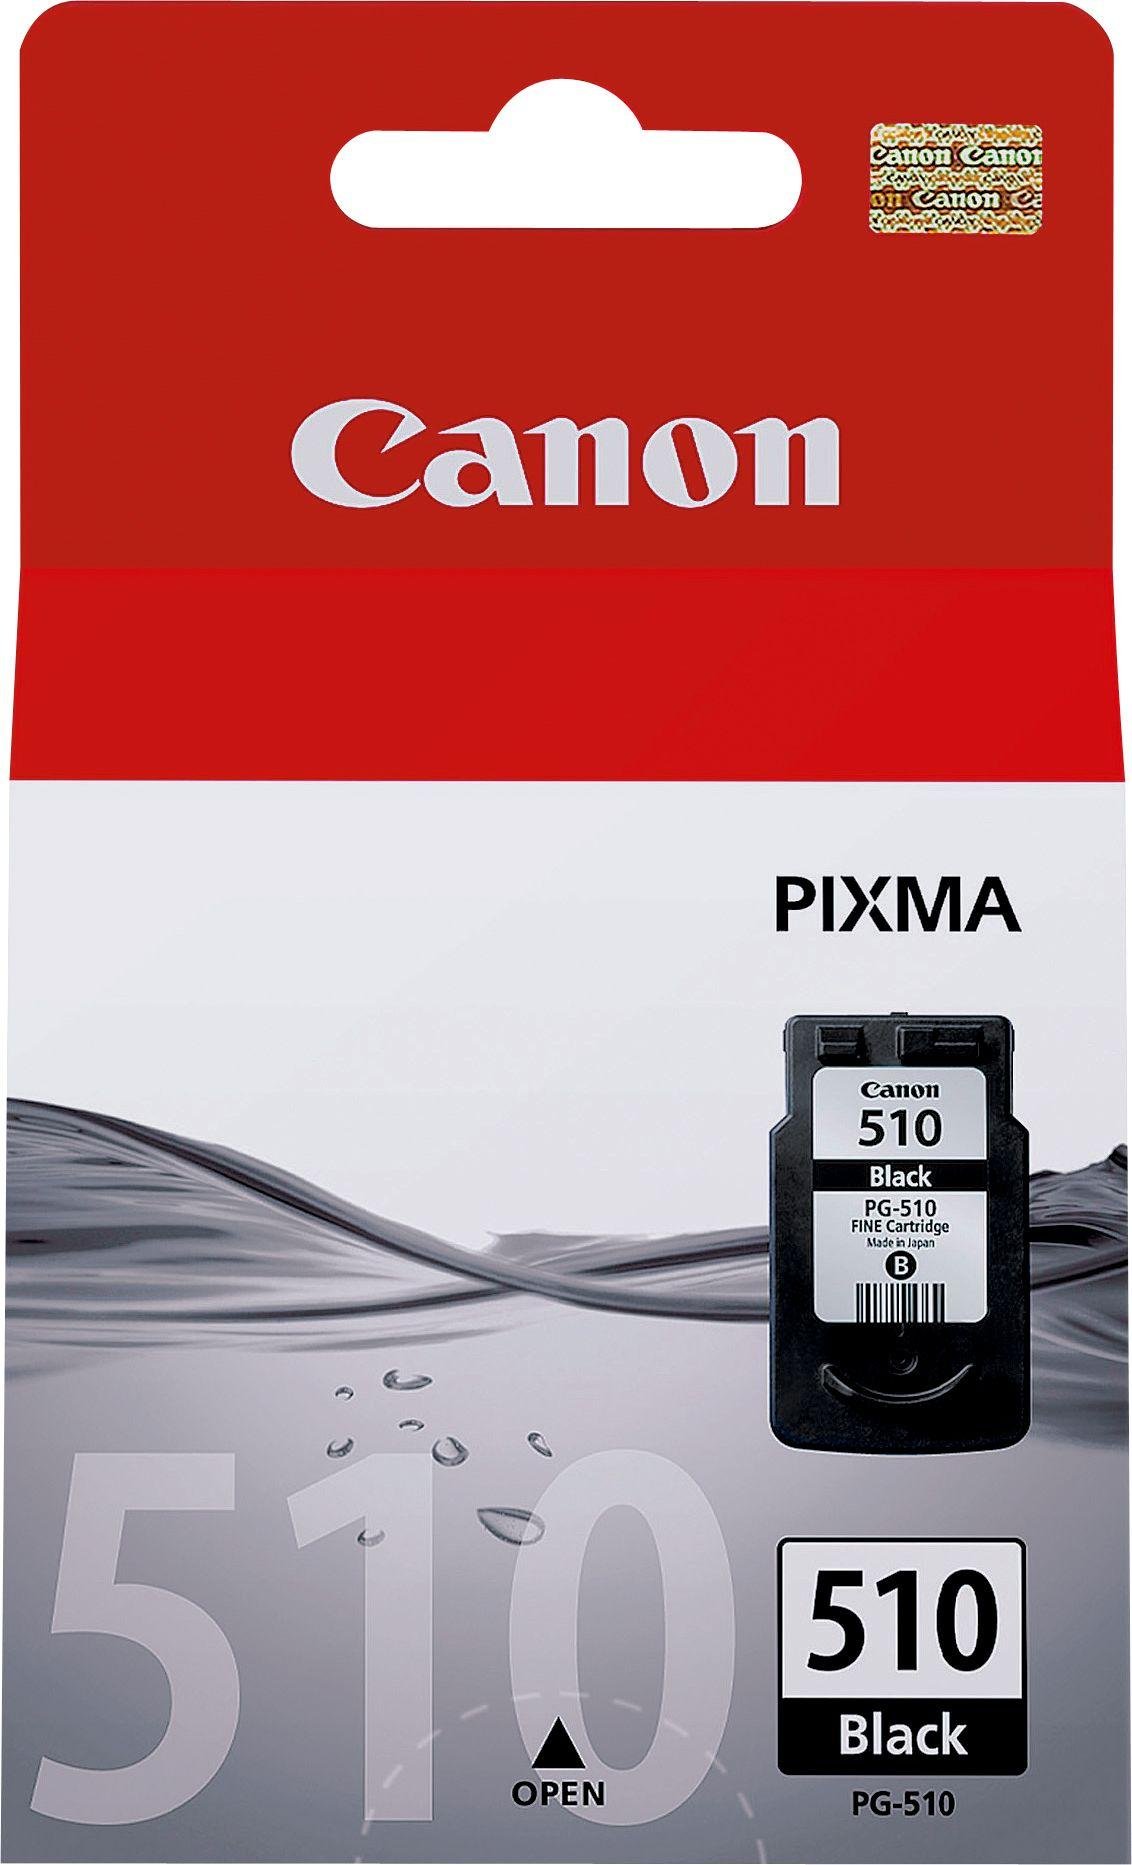 Canon PG-510 Ink Cartridge Review